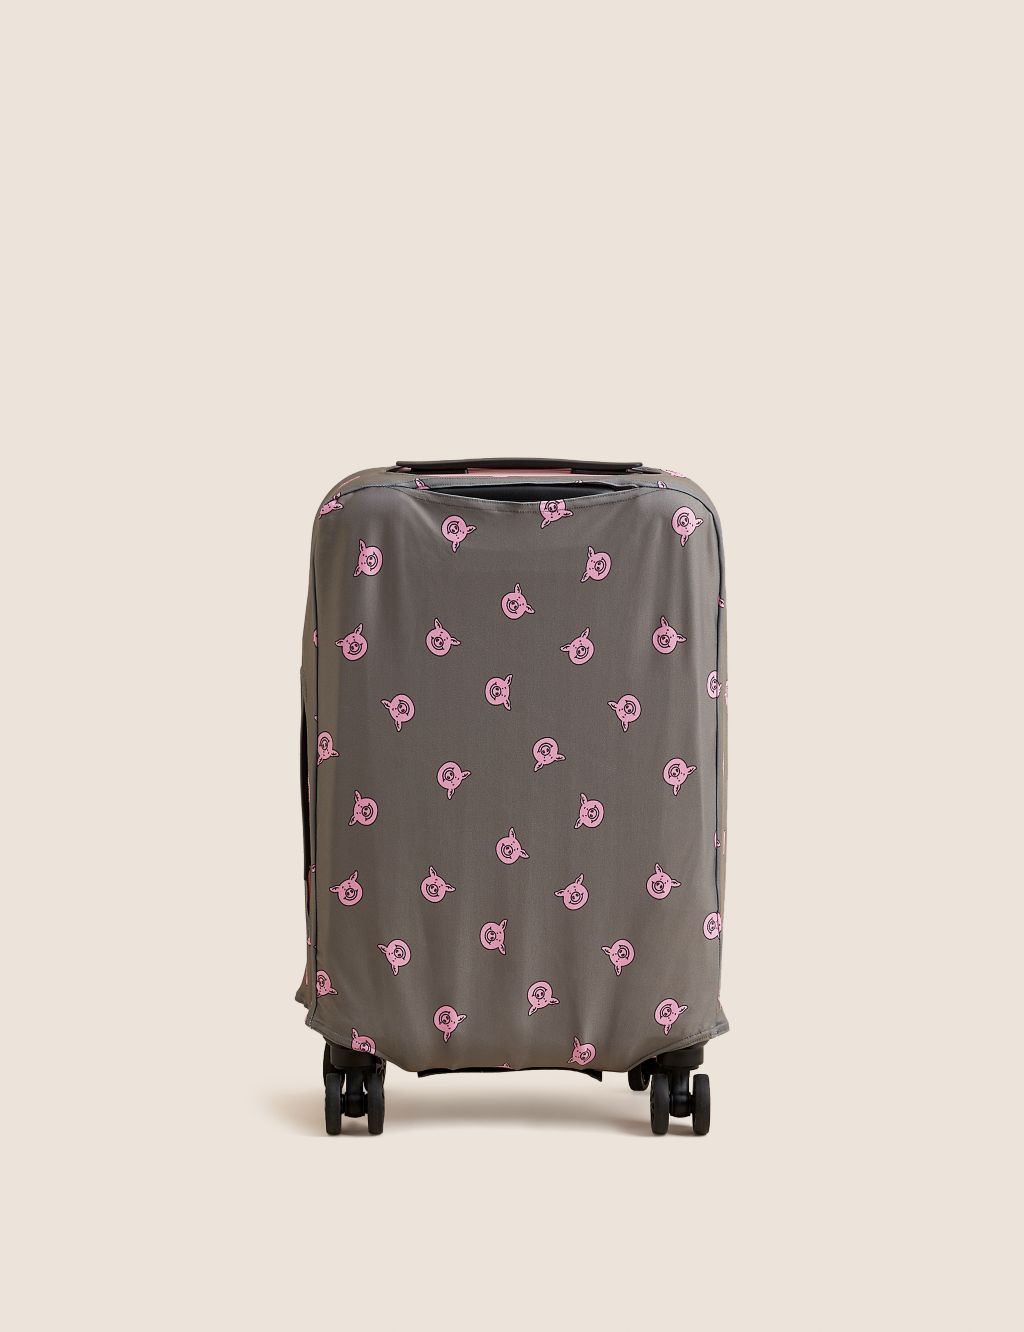 Percy Pig™ Suitcase Cover image 3